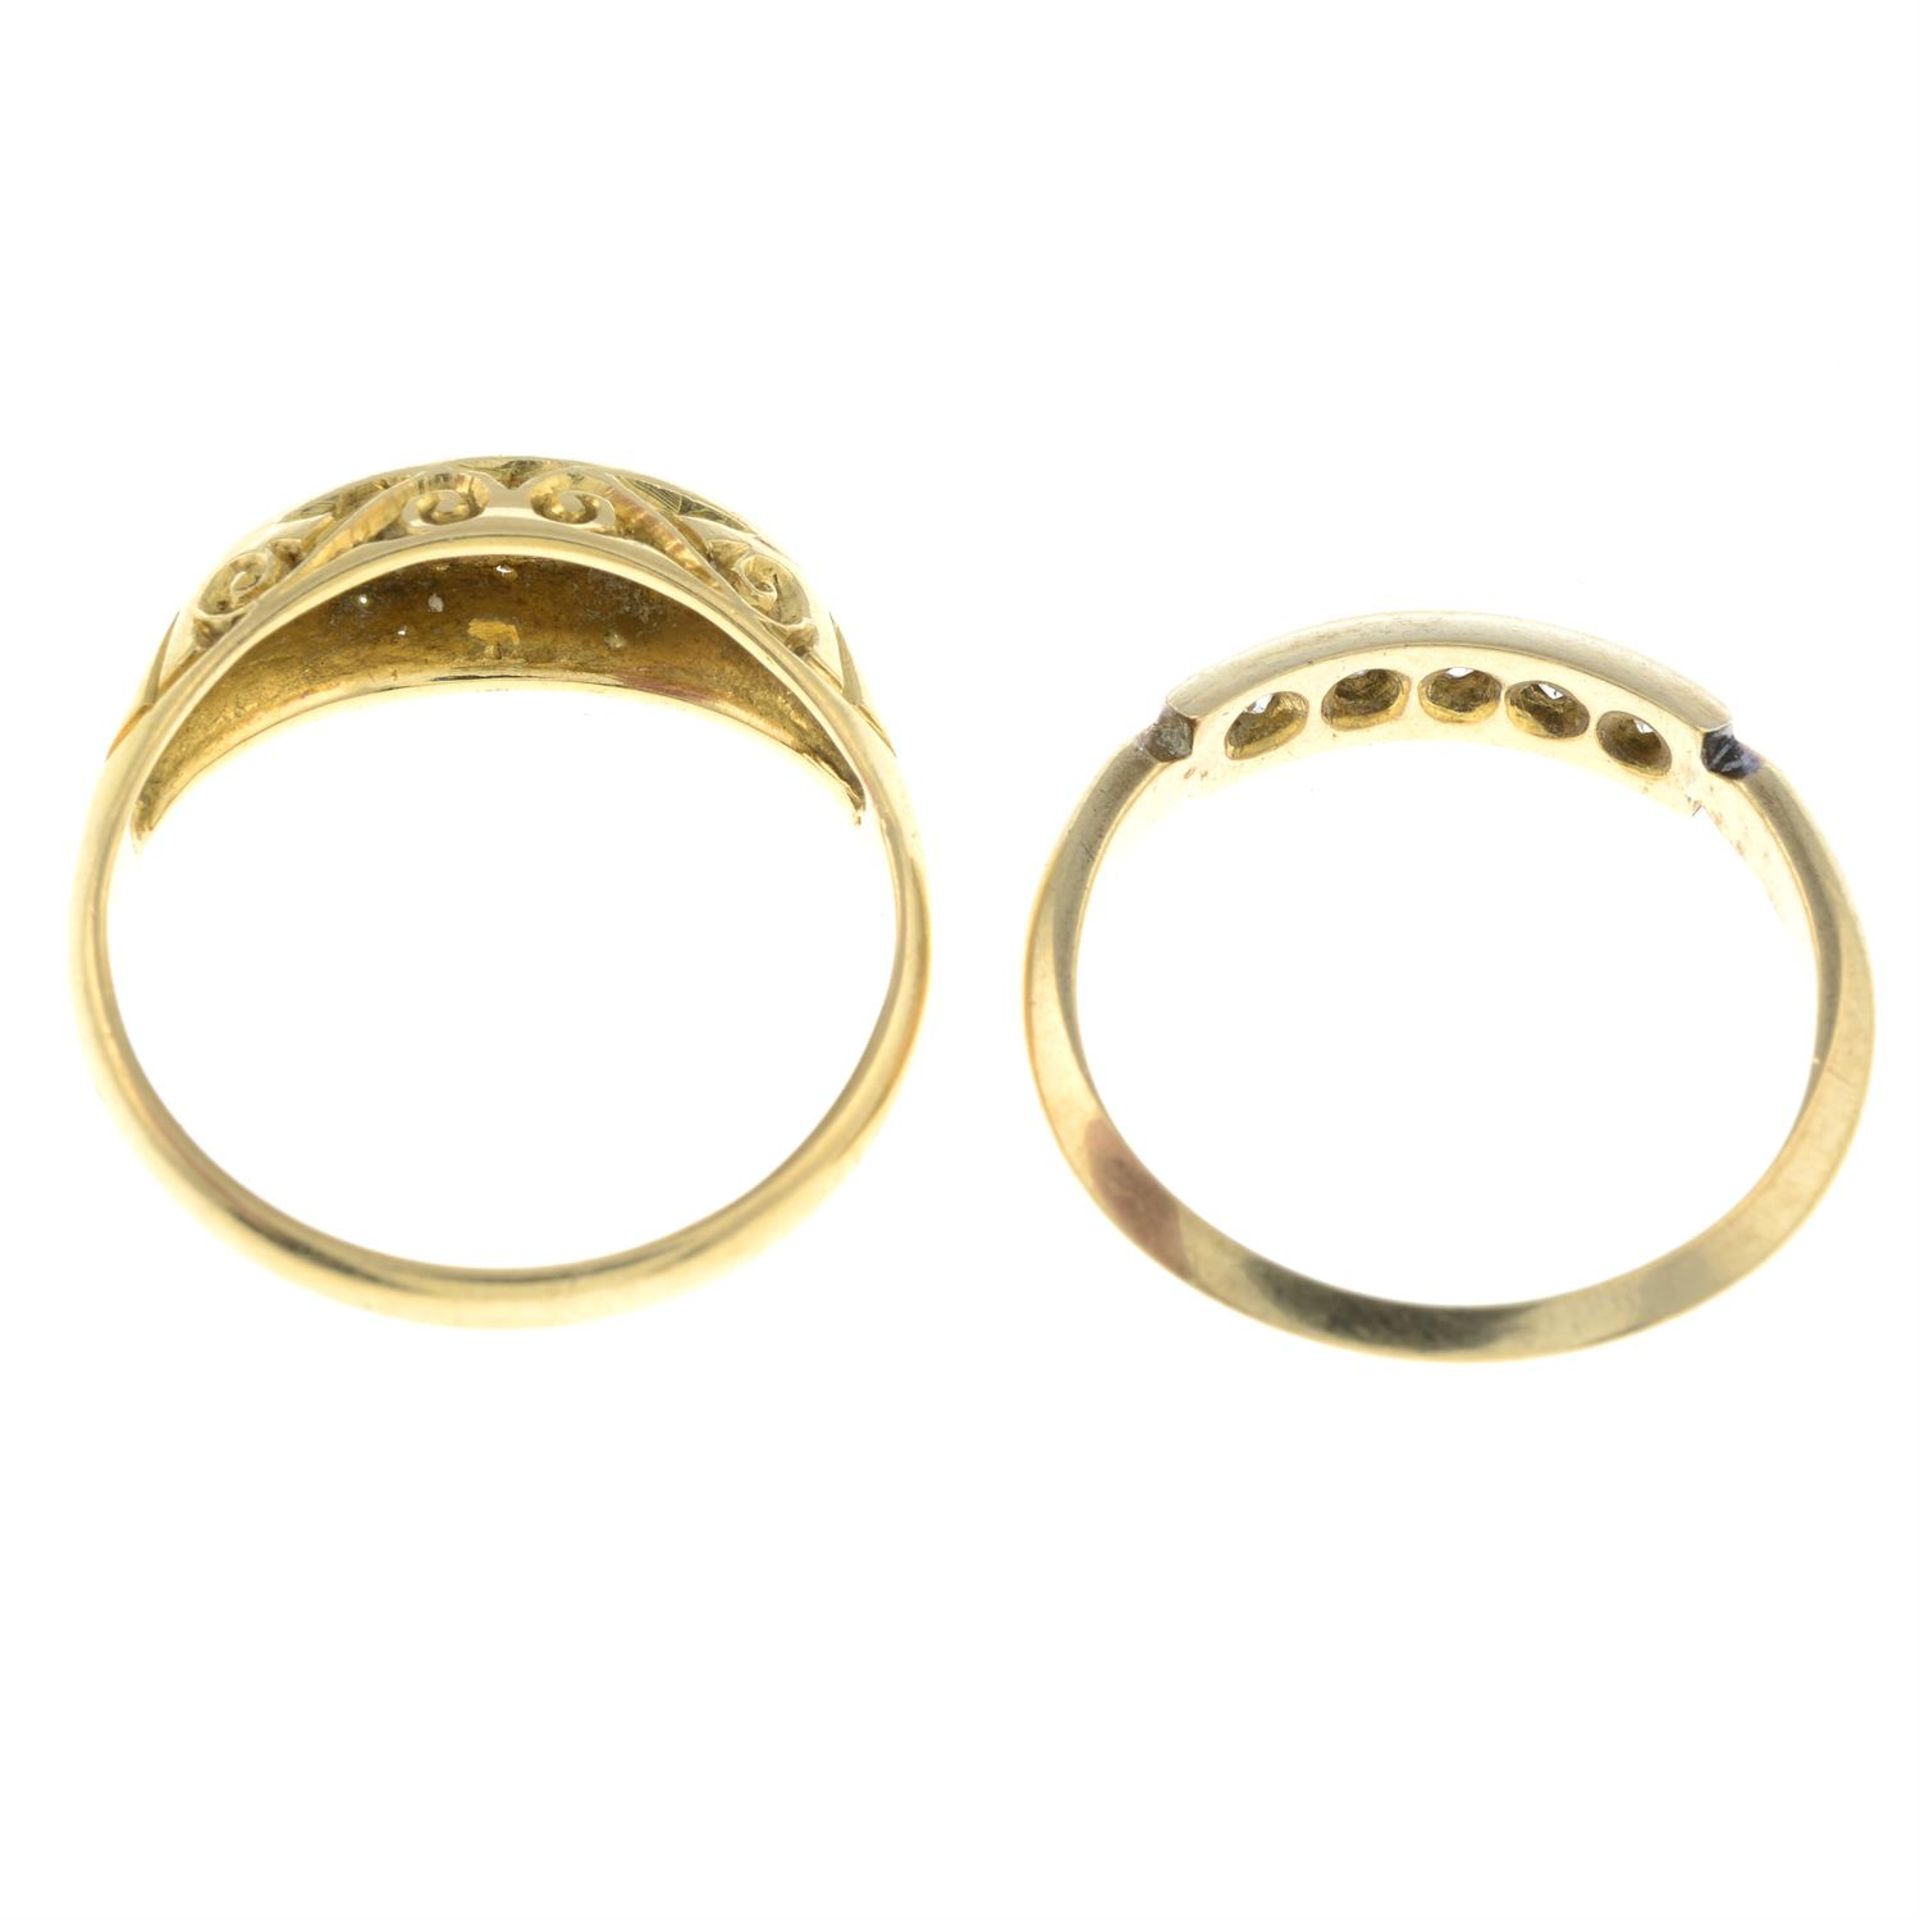 Two early 20th century gold diamond five-stone rings. - Image 2 of 2